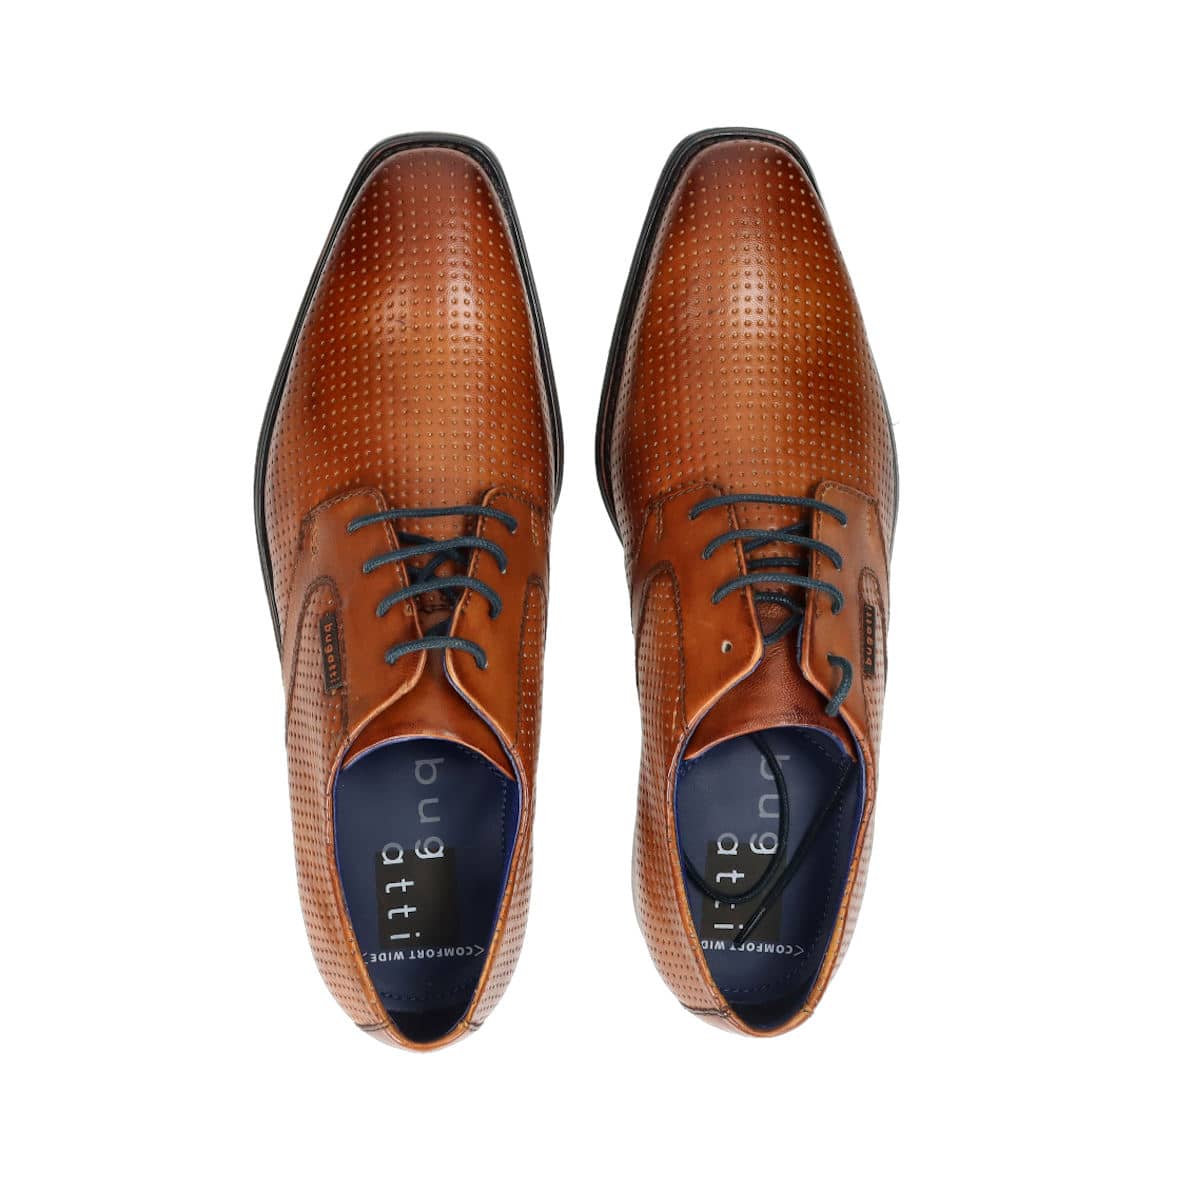 College Ontwapening long Bugatti men's leather formal shoes - cognac brown | Robel.shoes